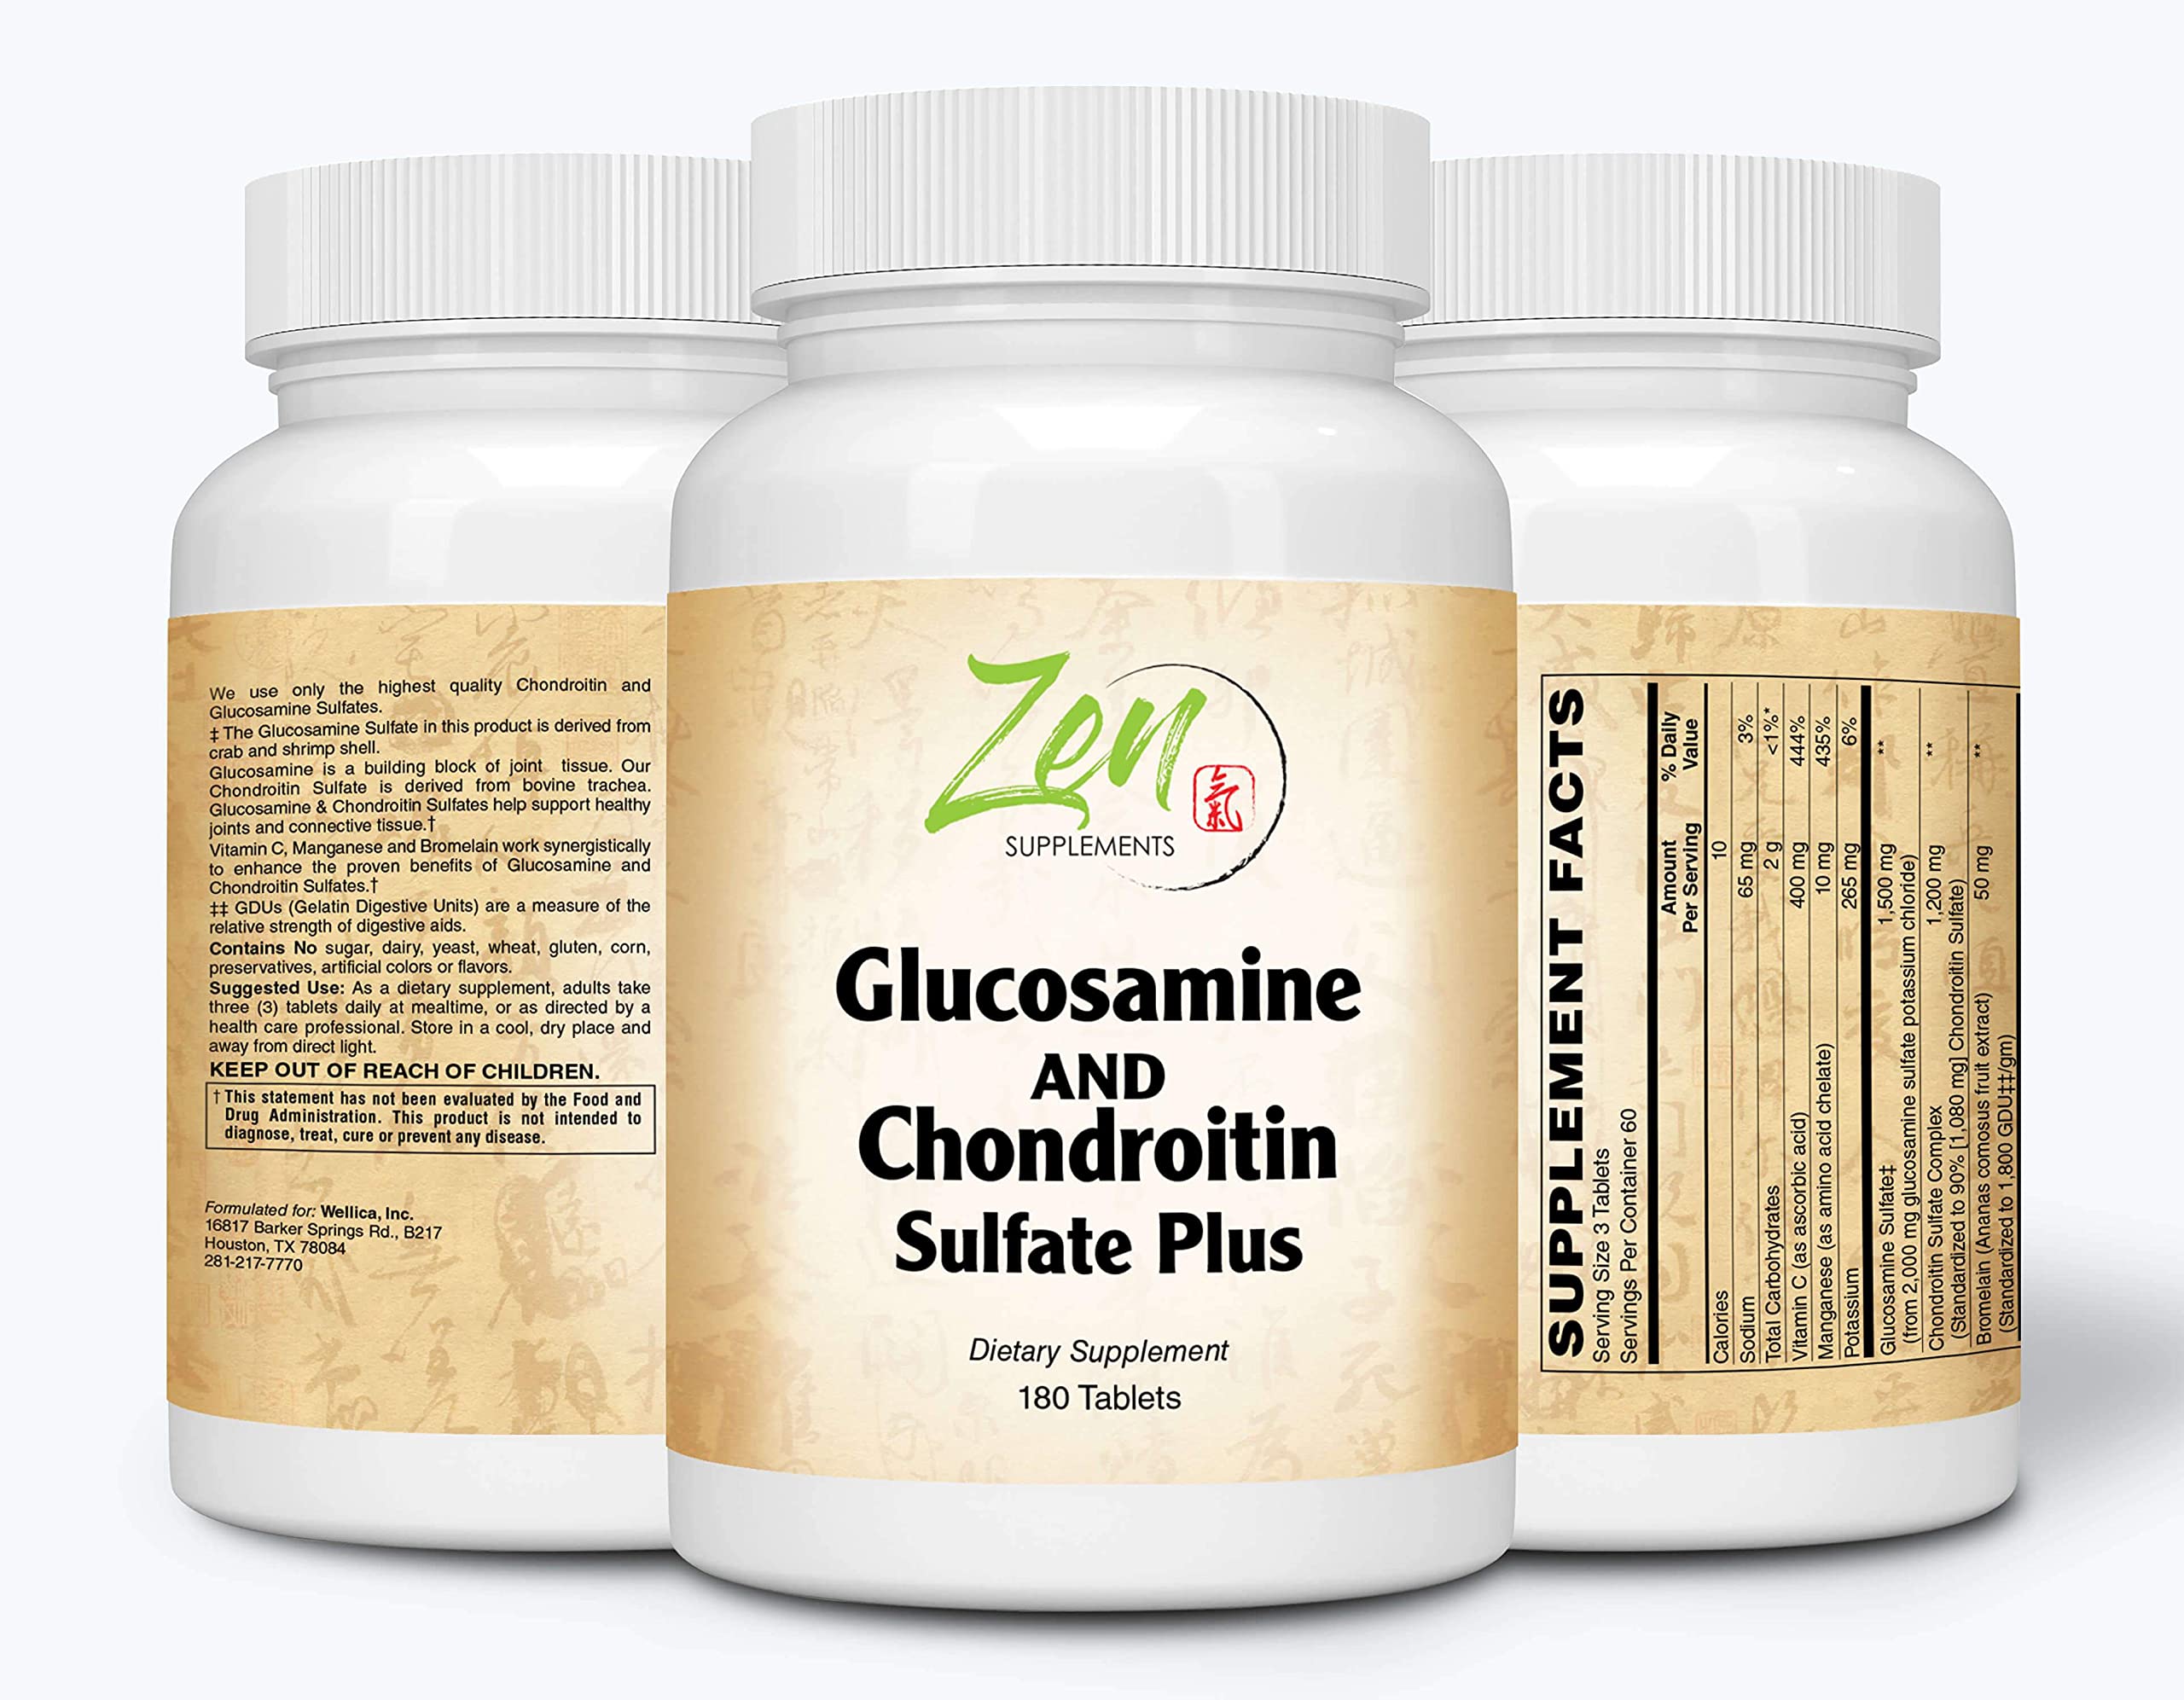 Zen Supplements - Glucosamine & Chondroitin Sulfate Plus - Supports Healthy Joint Structure, Mobility Function & Comfort 180-Tabs